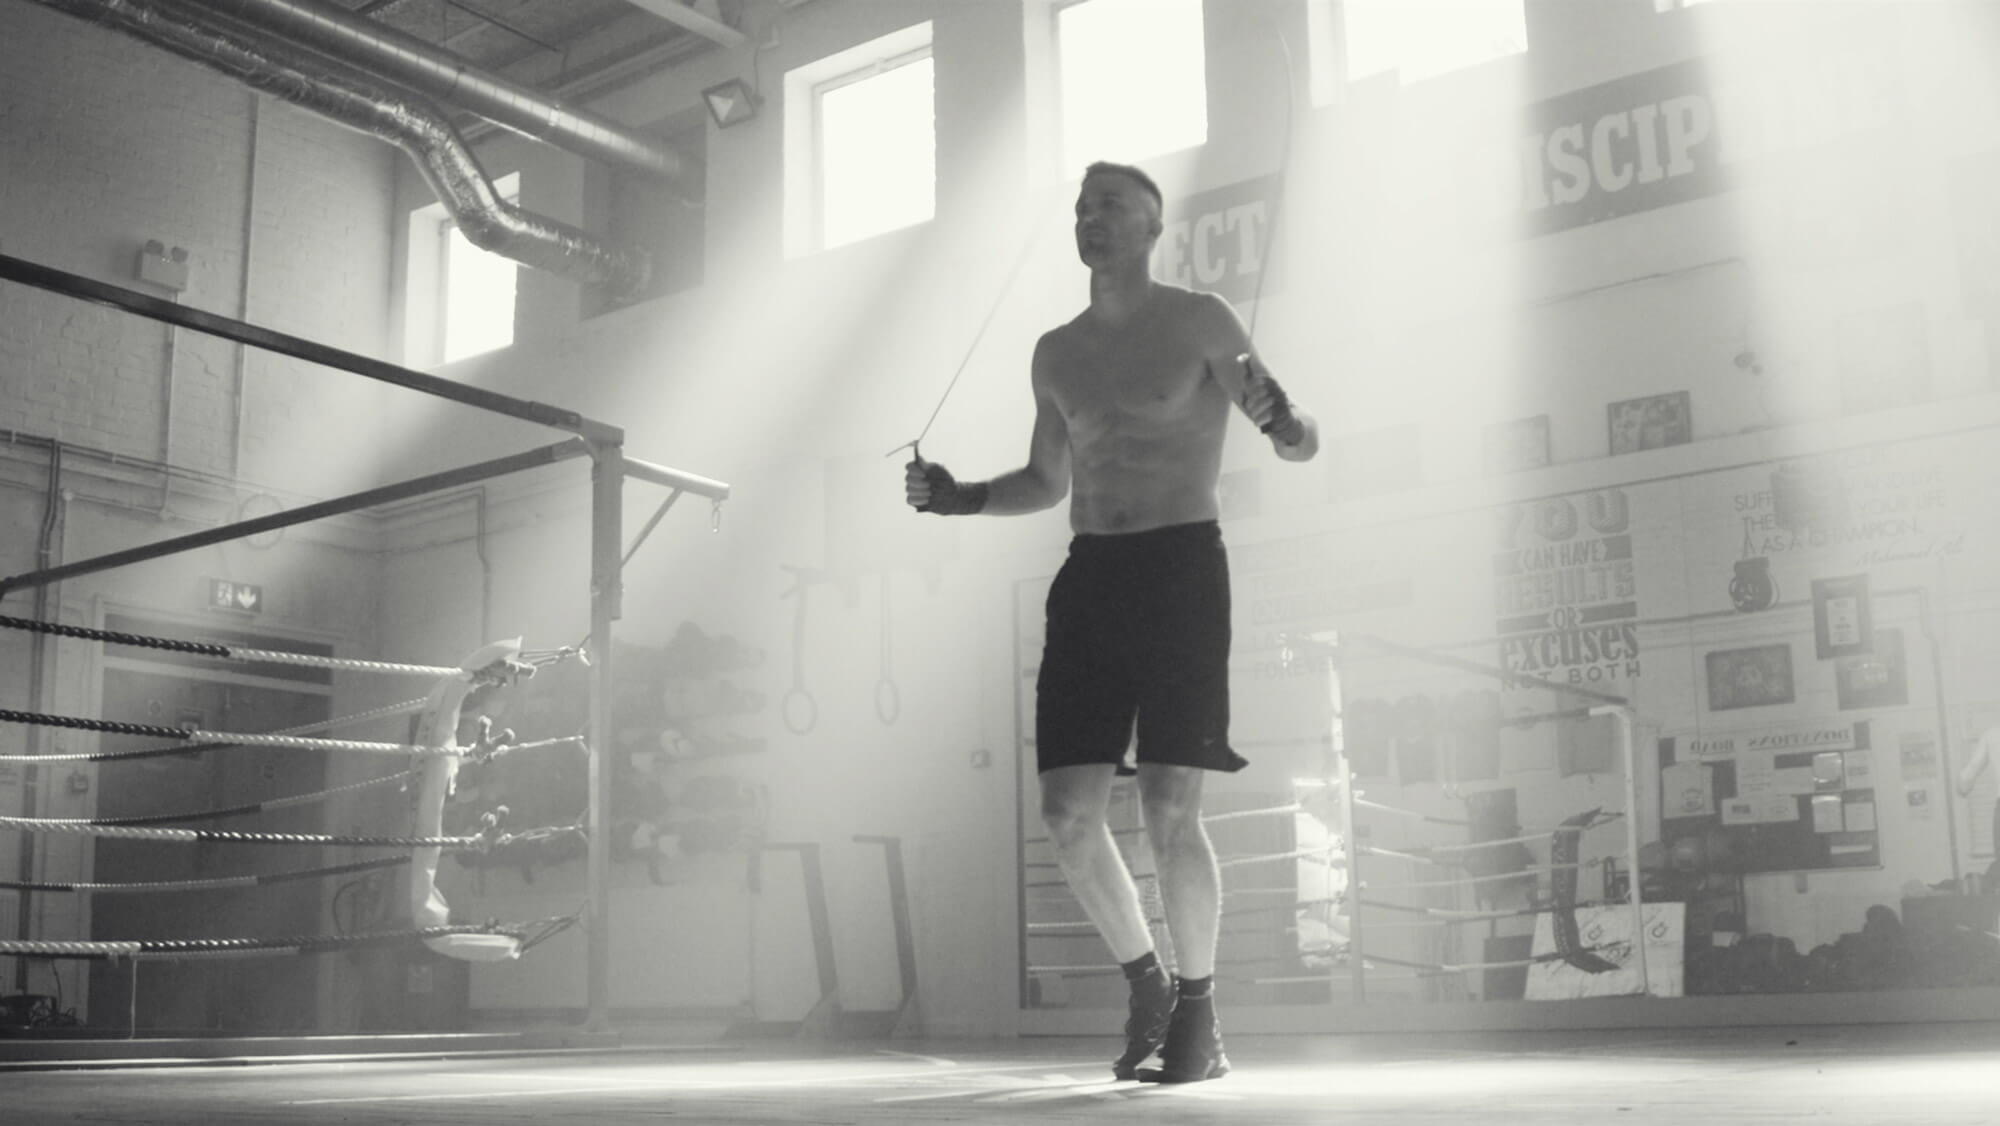 Boxer Josh Taylor, the Tartan Tornado, training with a skipping rope, from the Rise Media case studies archive